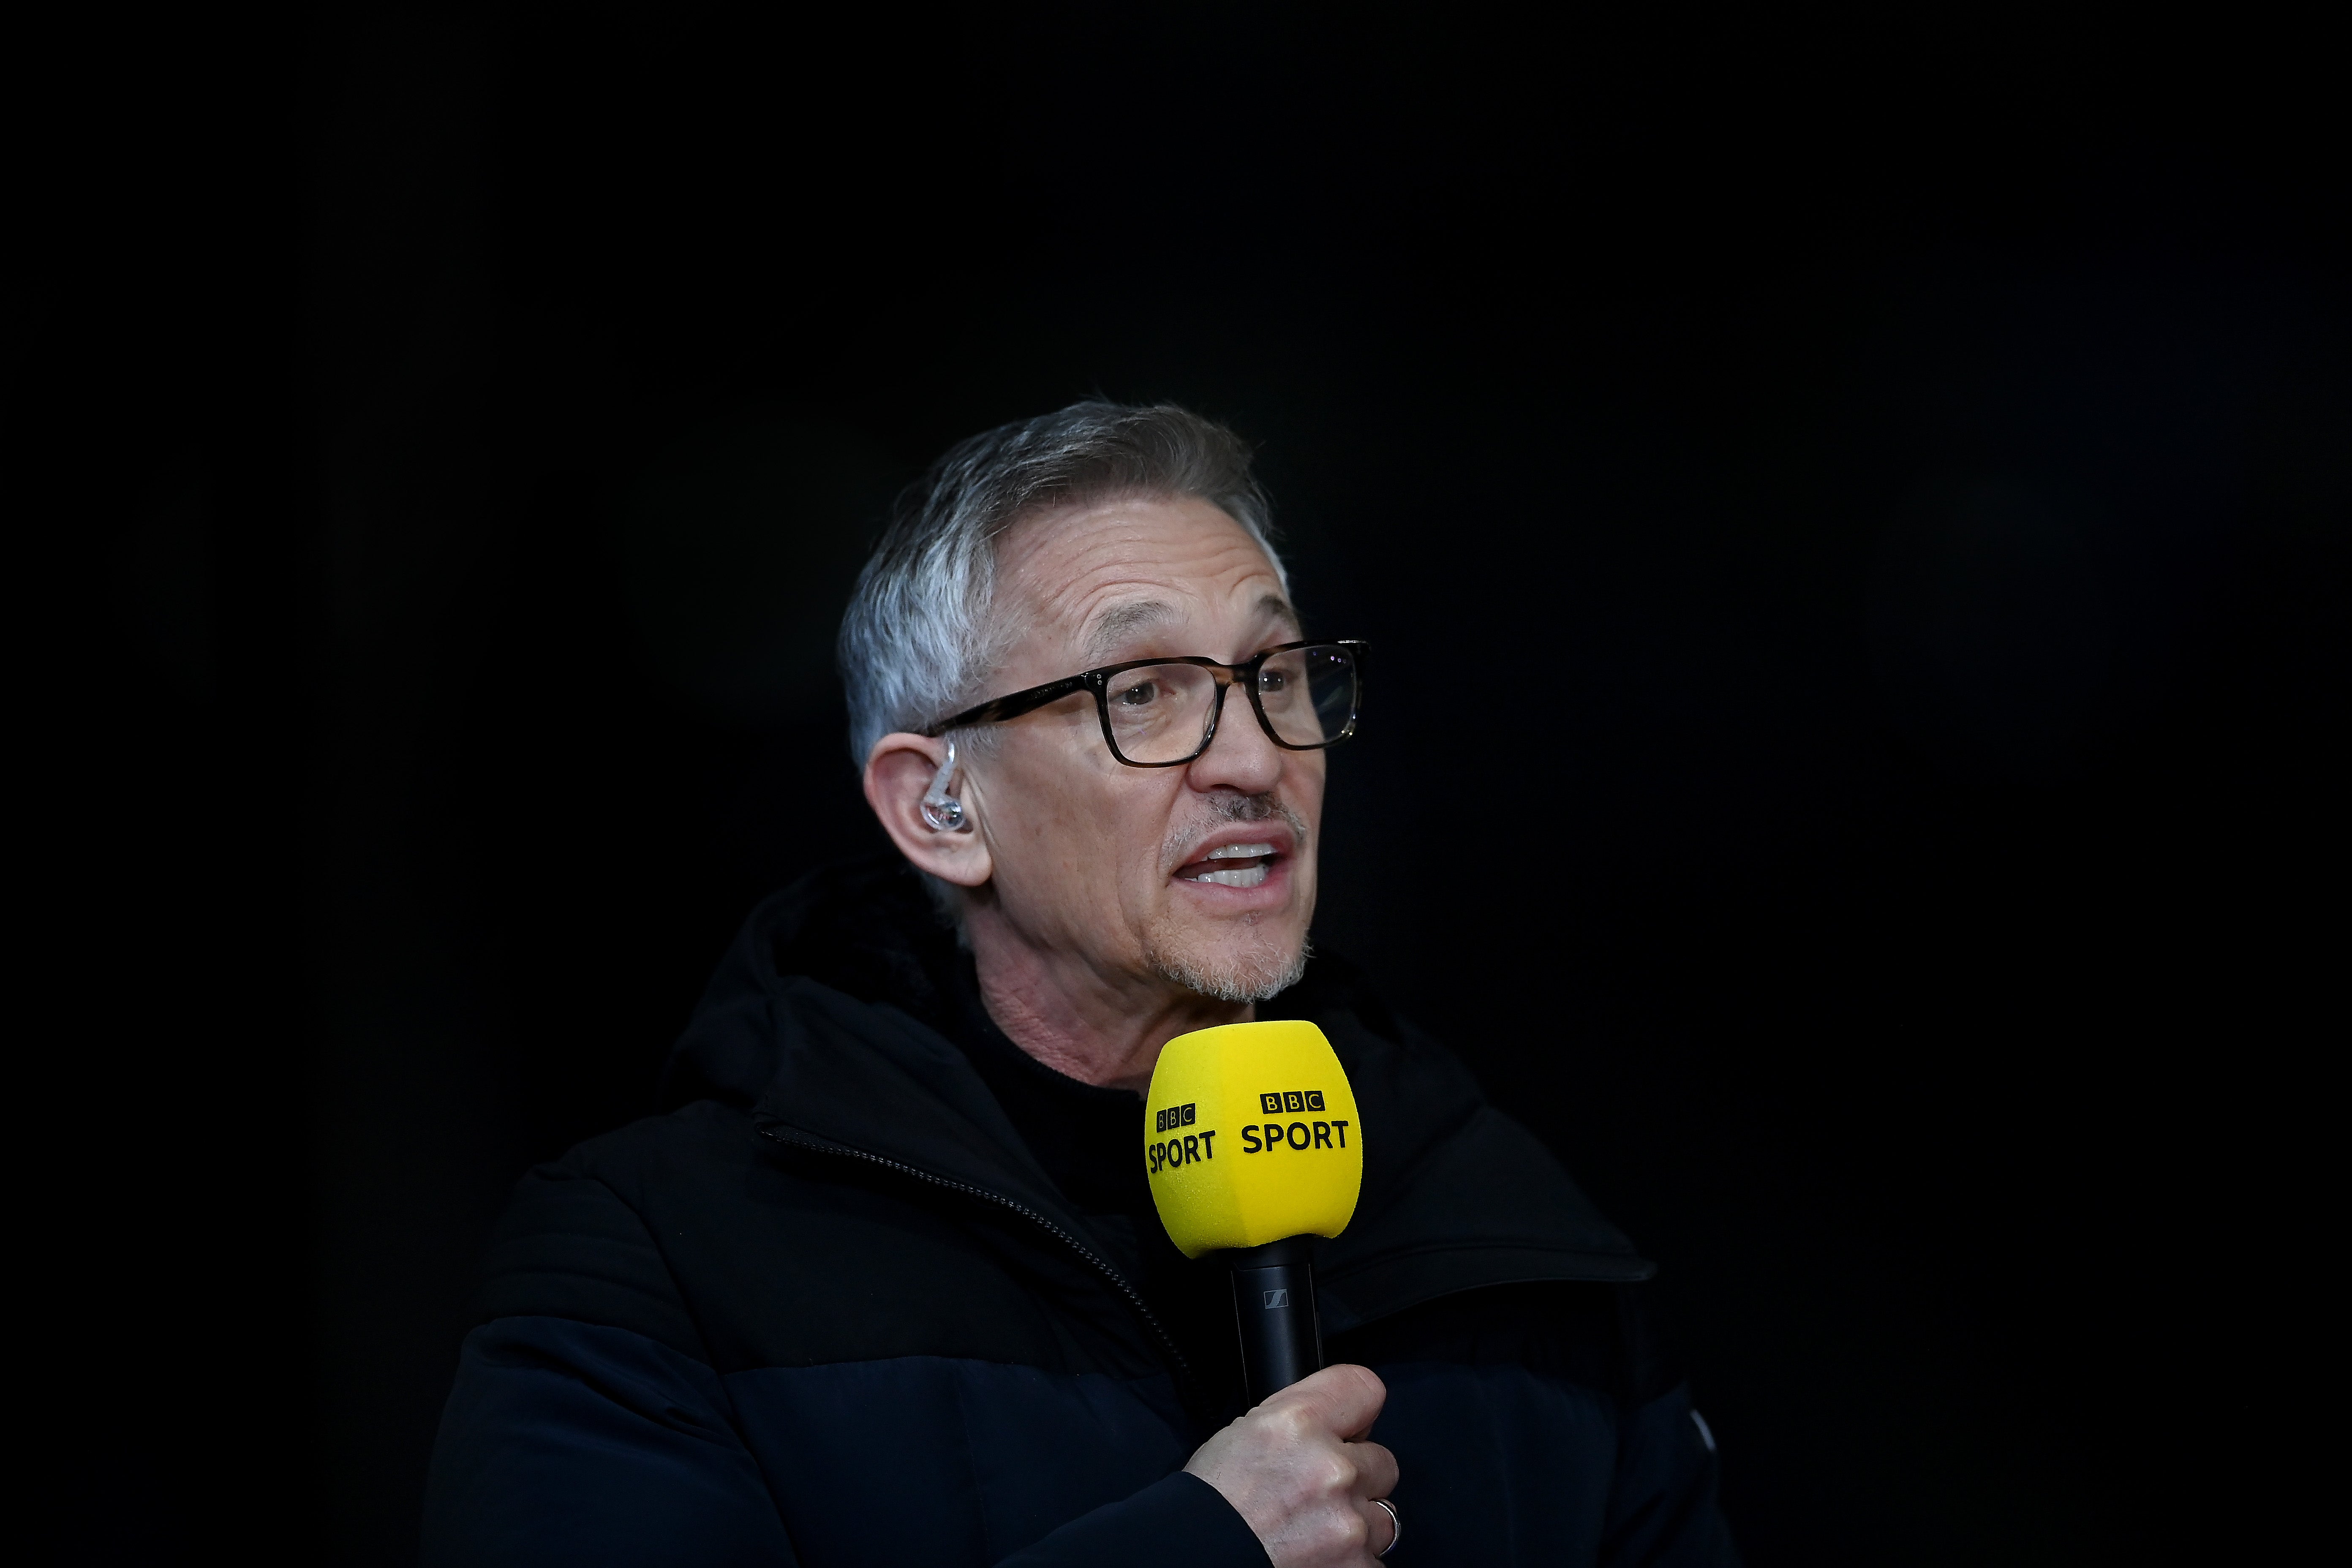 Gary Lineker hosts Match of the Day as well as coverage of major football tournaments